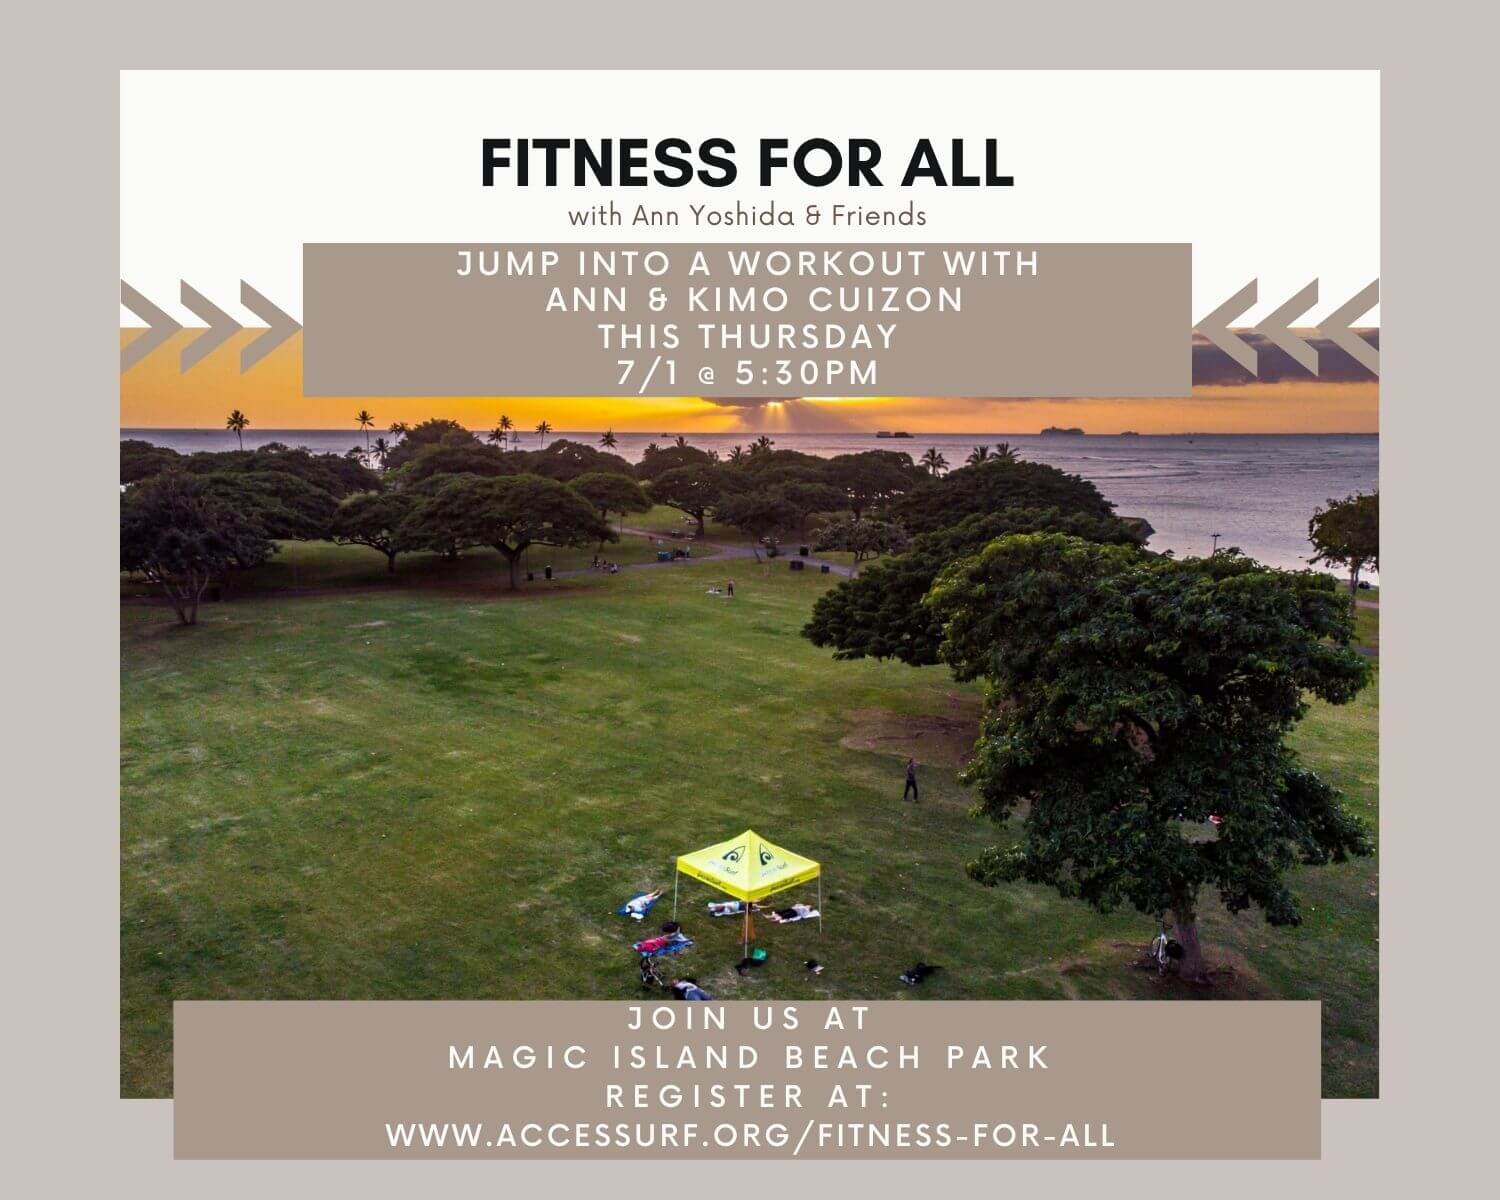 fitness for all flyer 7/1